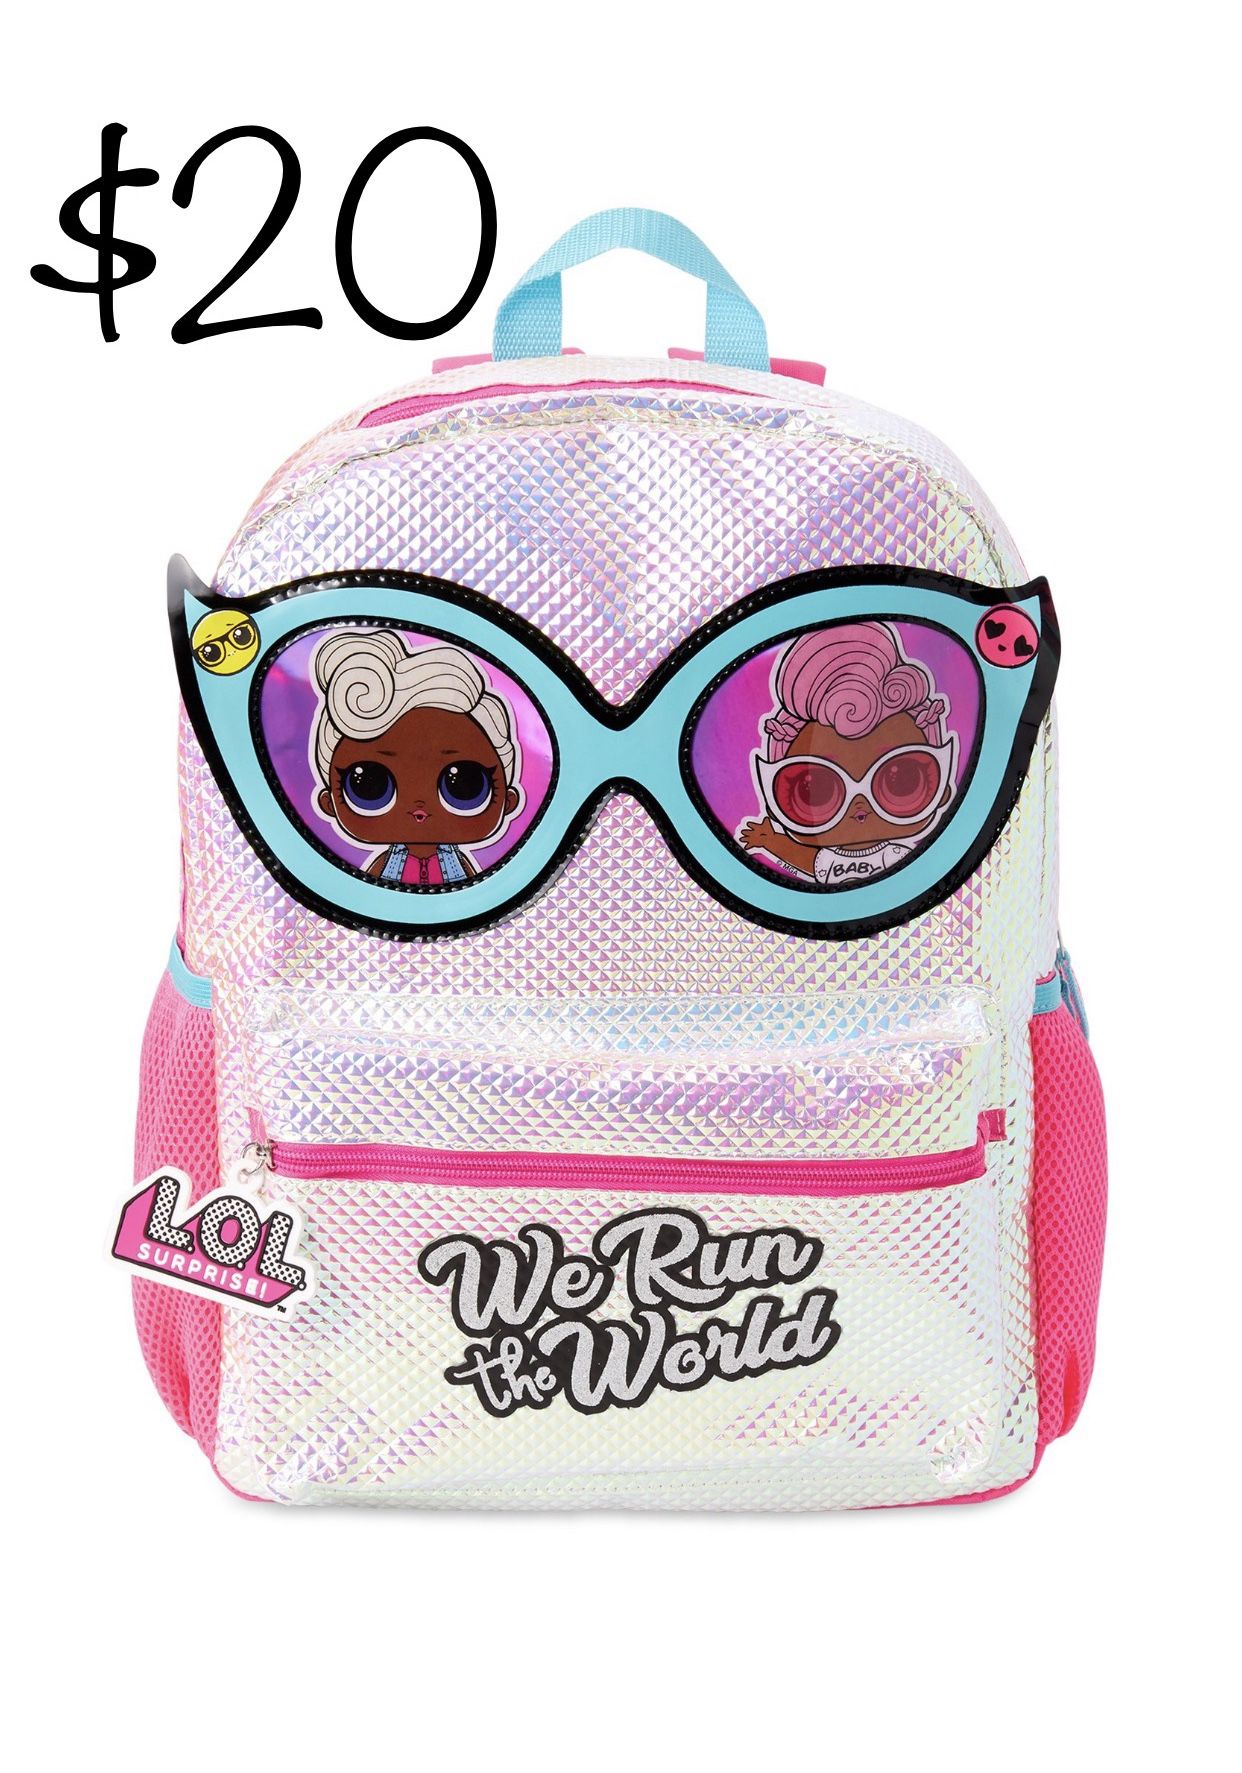 Lol Surprise Doll Girls We Run The World Backpack L.O.L